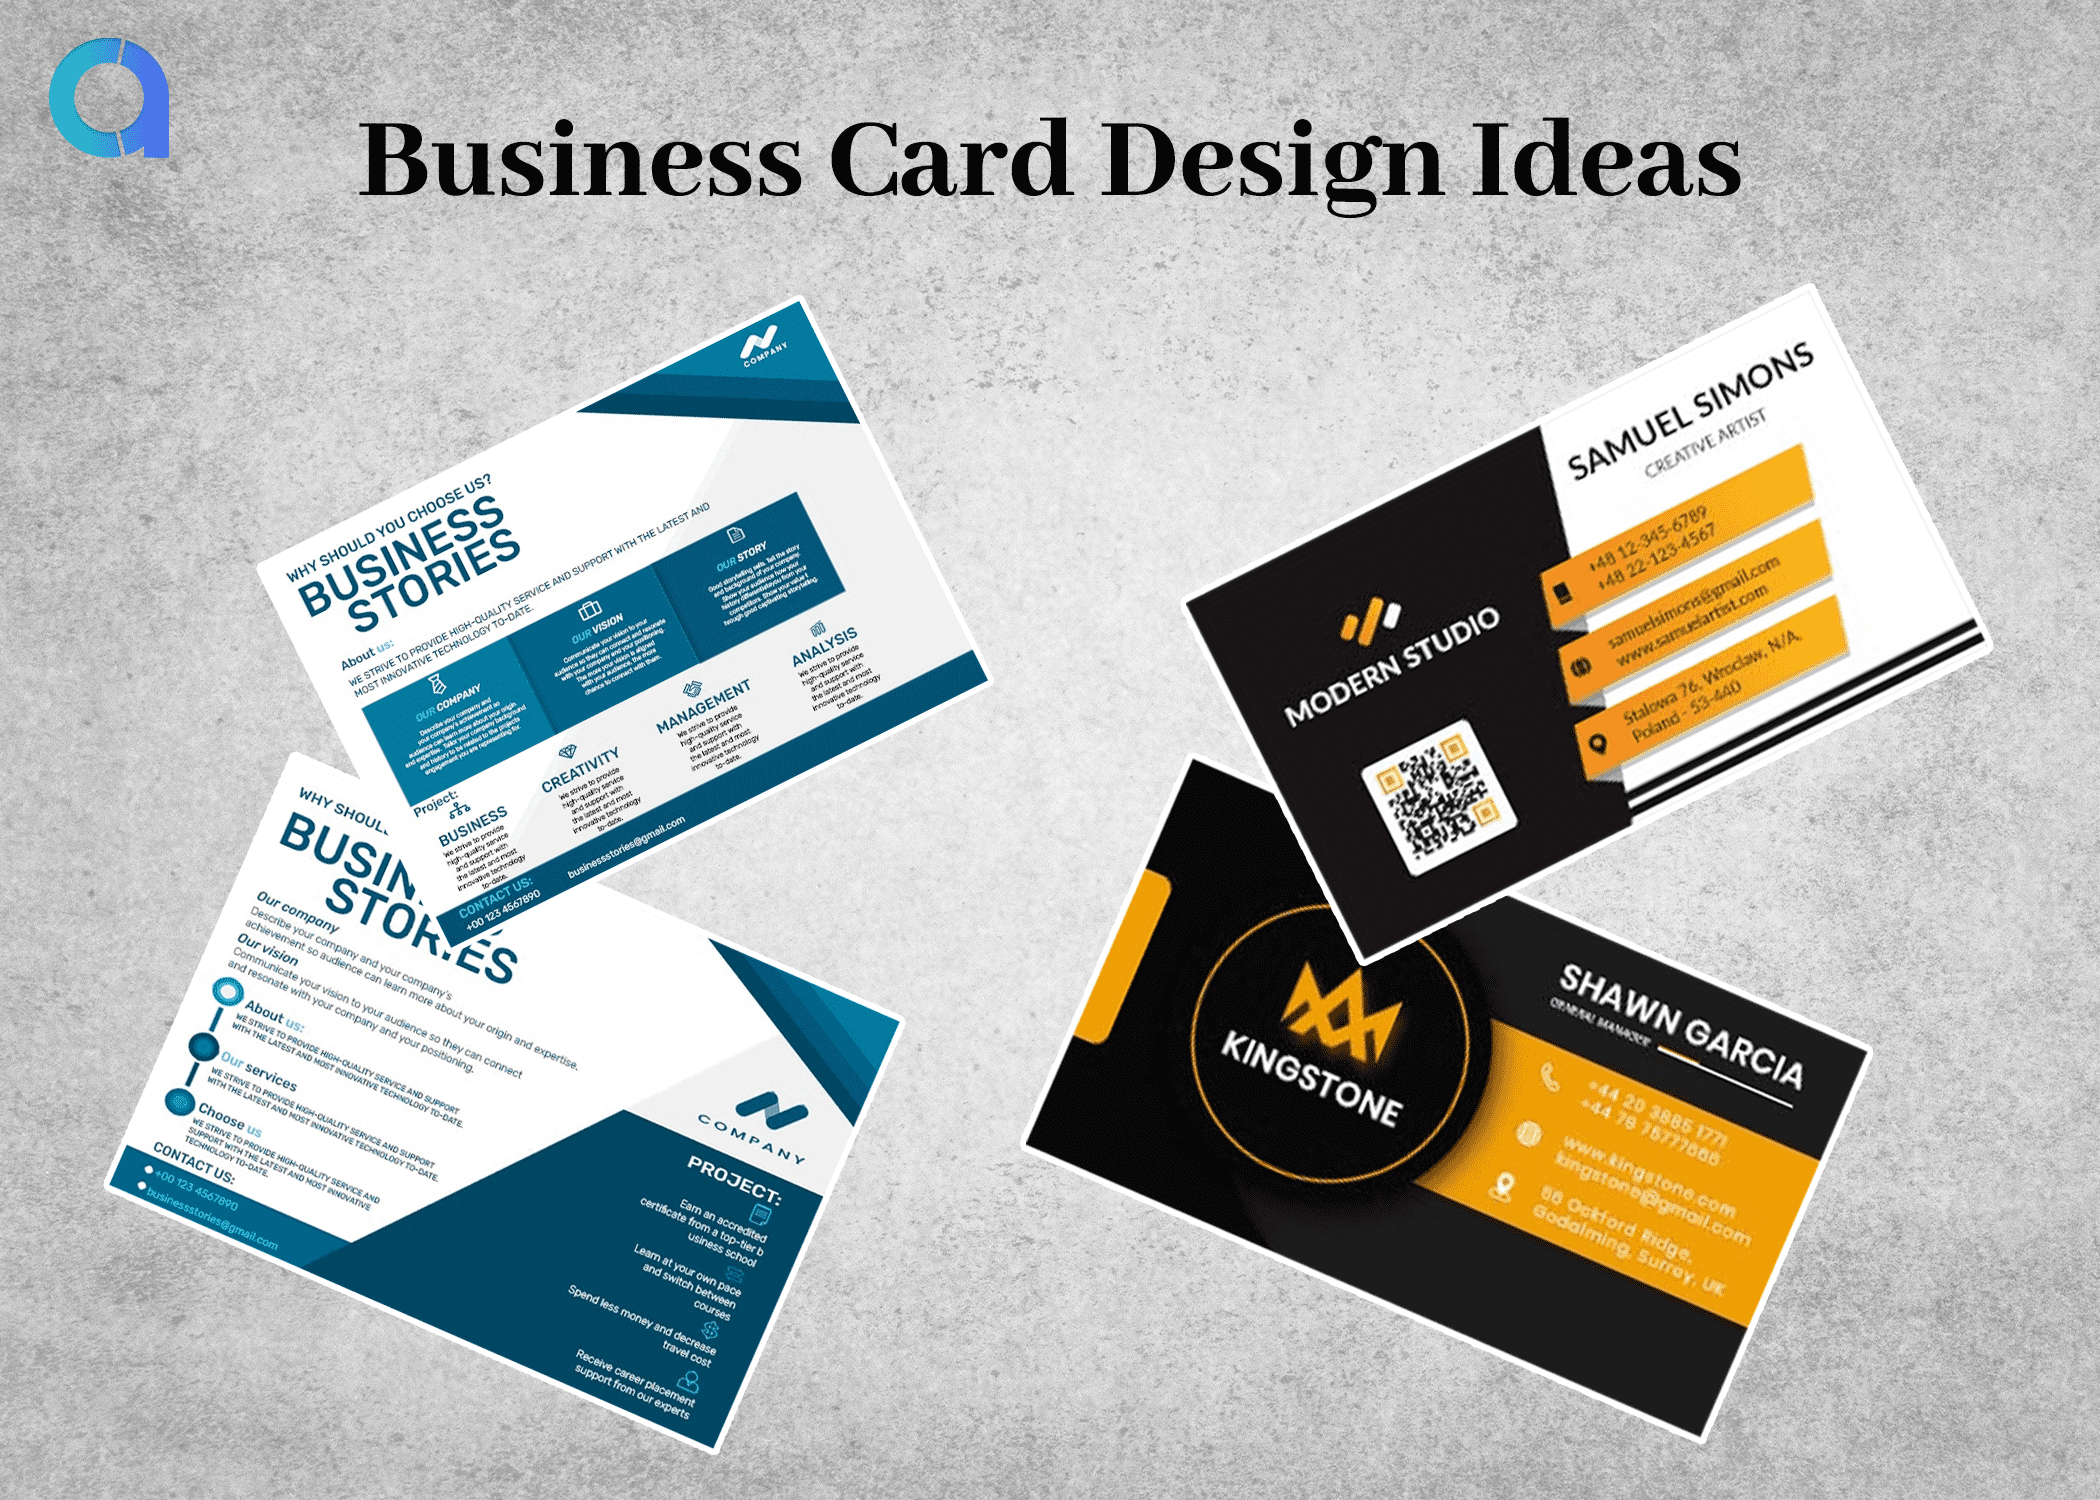 Unleash Your Creativity: Inspiring Business Card Design Ideas for Every Industry